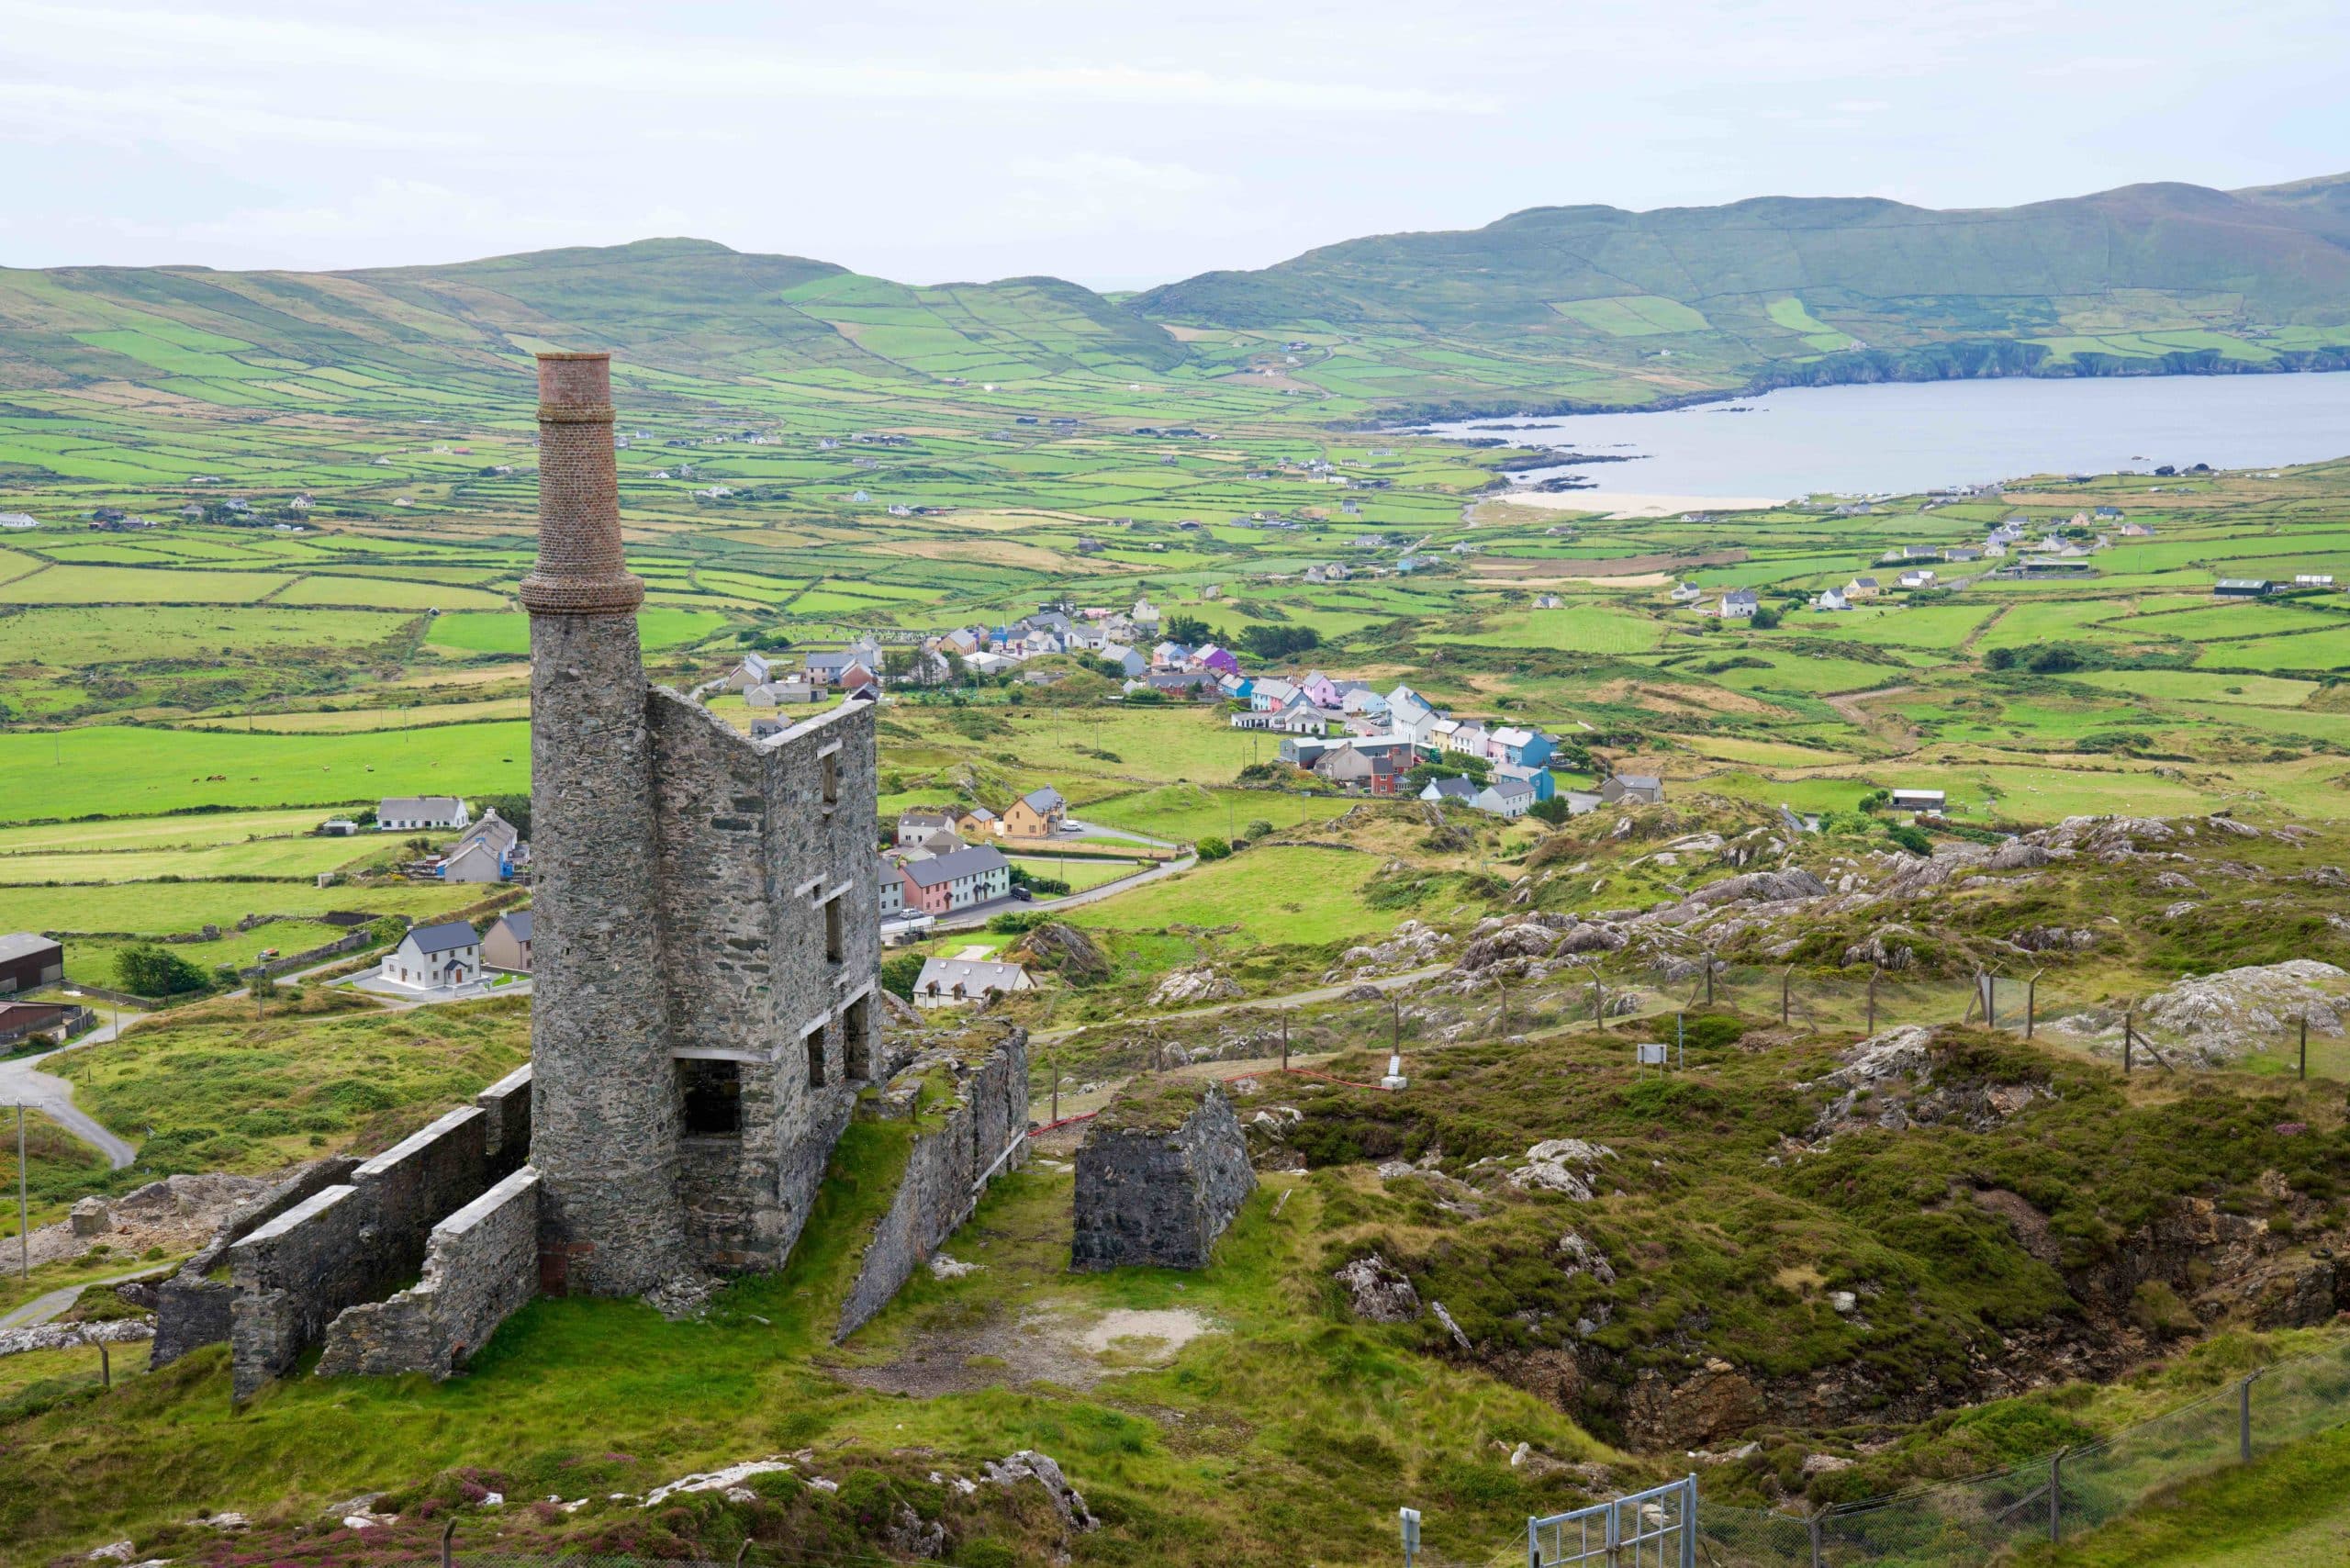 RTÉ series ‘Building Ireland’ visits Allihies this month